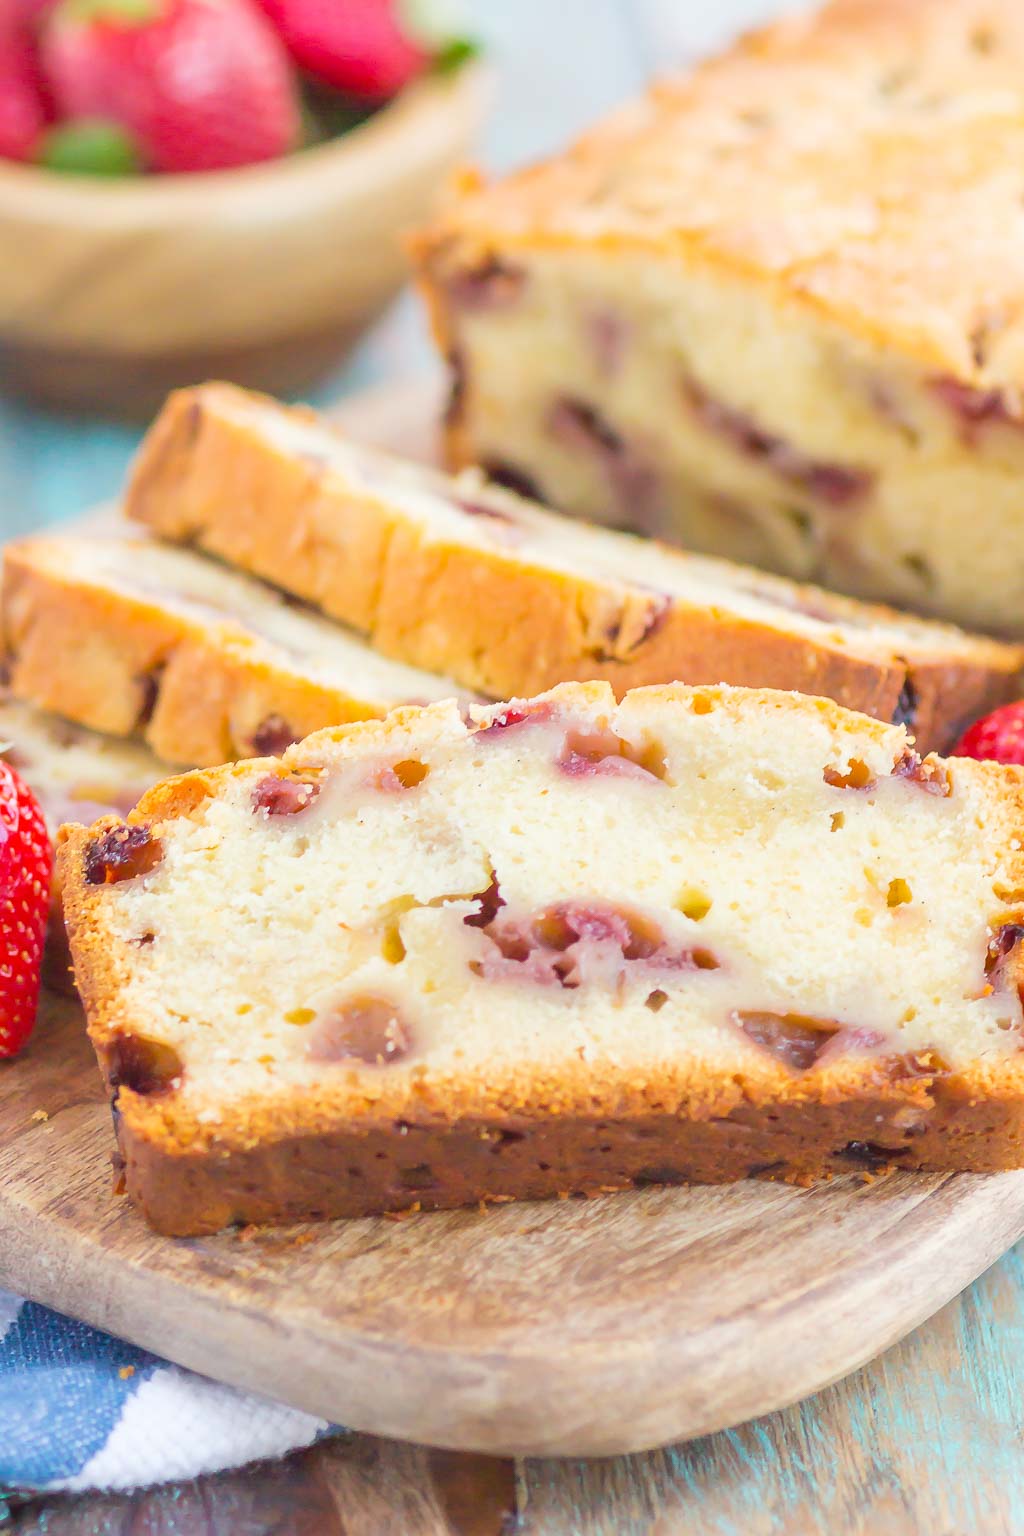 Strawberry Pound Cake is a simple, one bowl recipe that's bursting with flavor. Fresh strawberries are sprinkled throughout this soft and dense pound cake, resulting in the most delicious taste. Perfect to serve alongside your morning coffee or as a tasty dessert! #poundcake #strawberrypoundcake